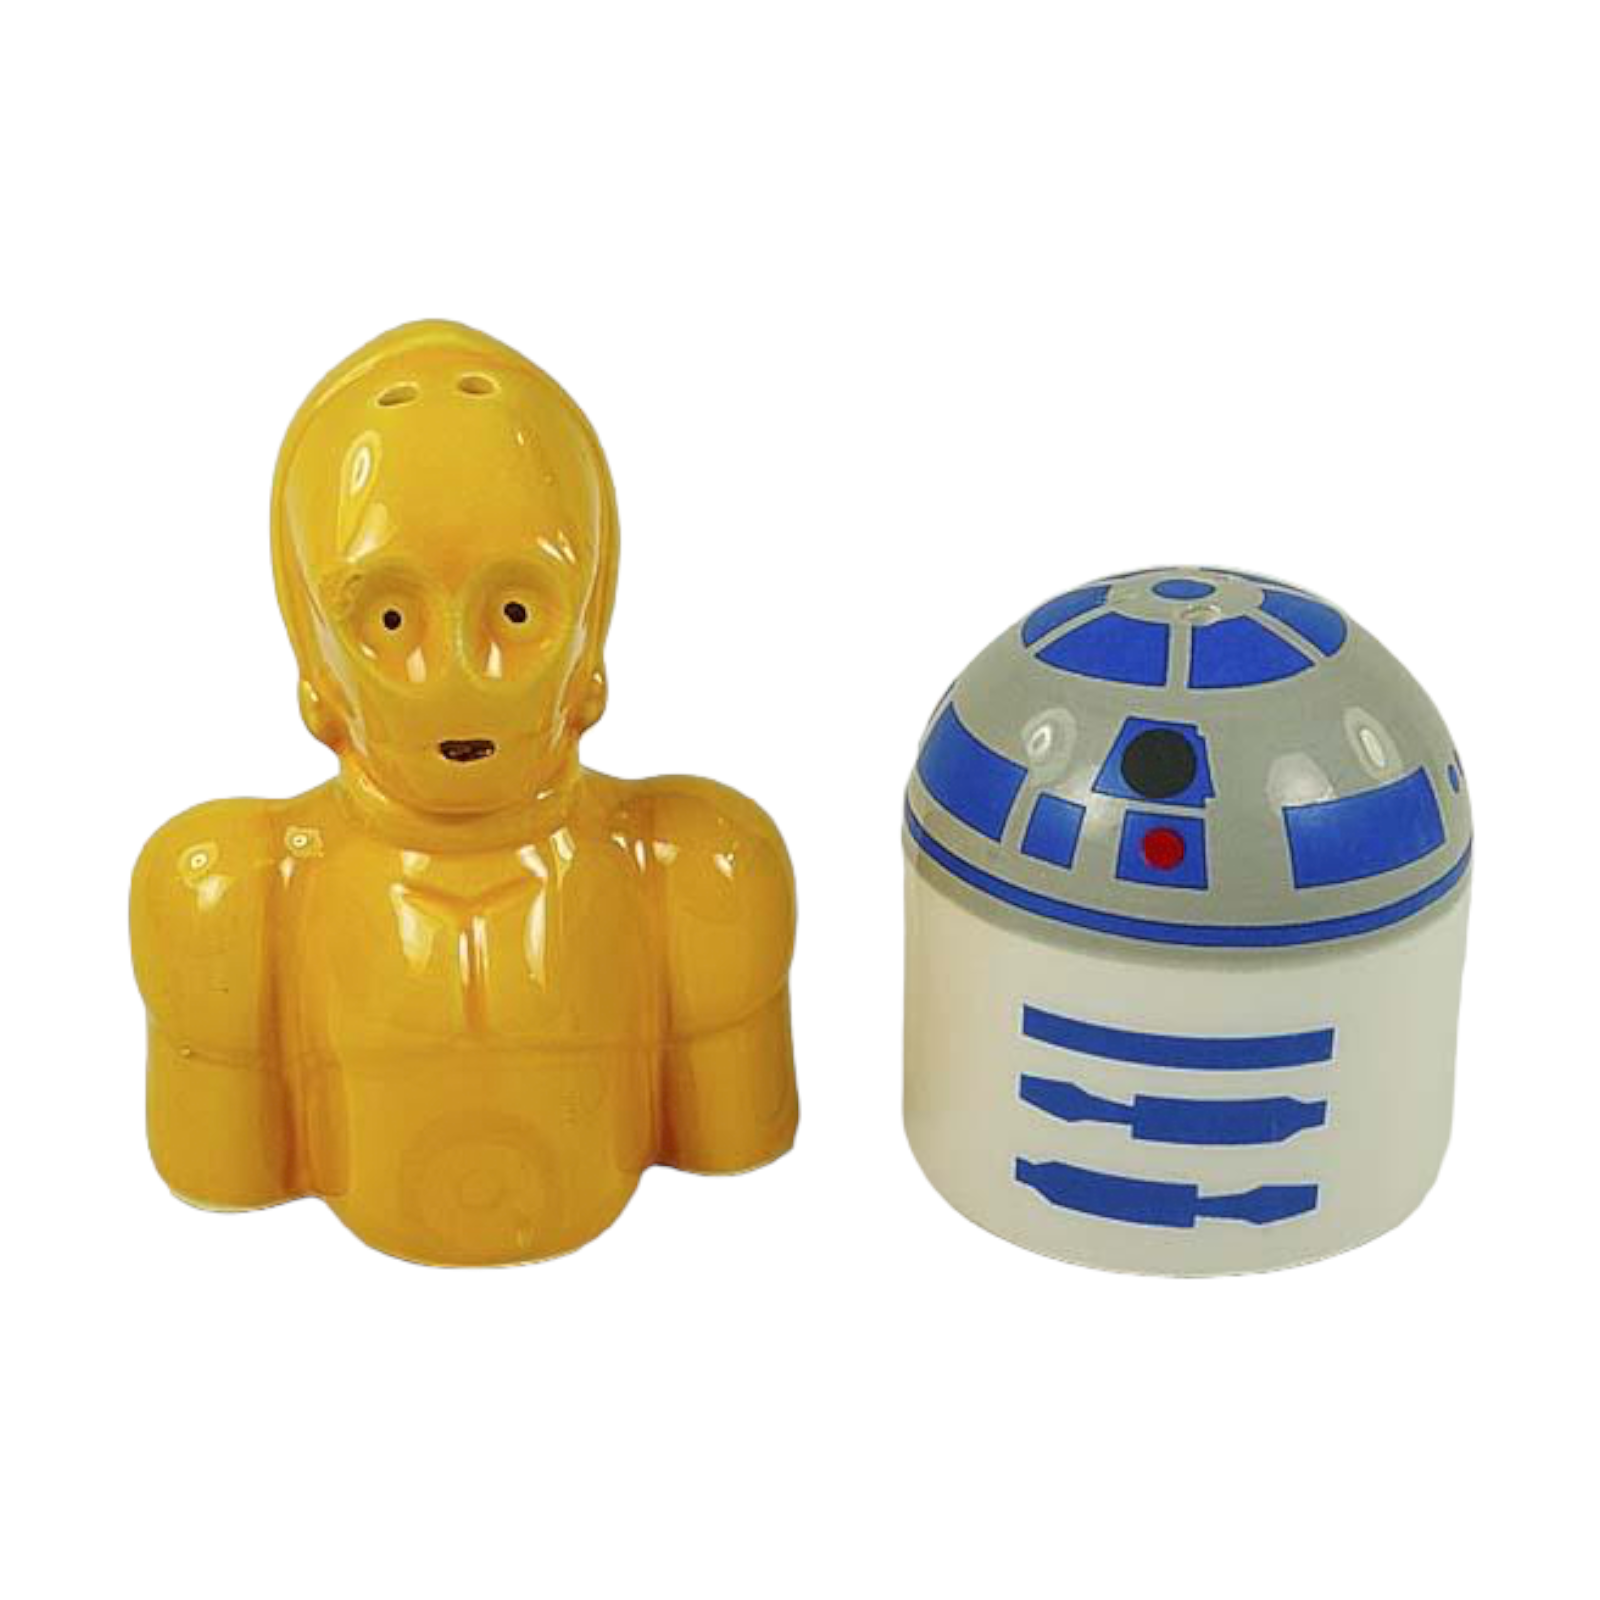 Disney's Star Wars R2-D2 And C3PO Salt And Pepper Shakers - Ceramic